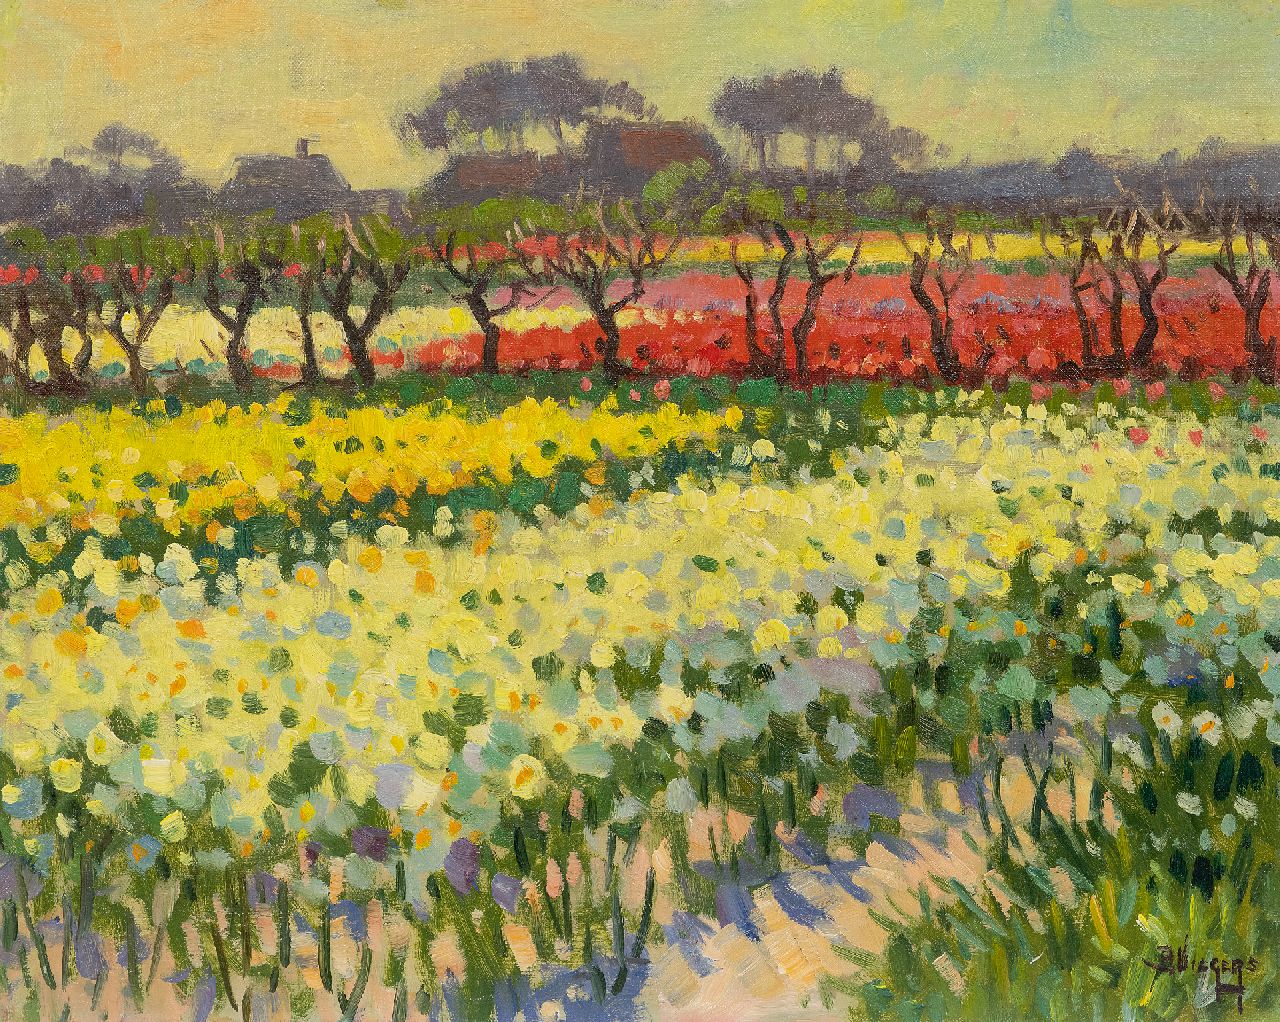 Viegers B.P.  | Bernardus Petrus 'Ben' Viegers, Narcissus- and tulip fields in Bakkum, North Holland, oil on canvas 40.6 x 50.6 cm, signed l.r.